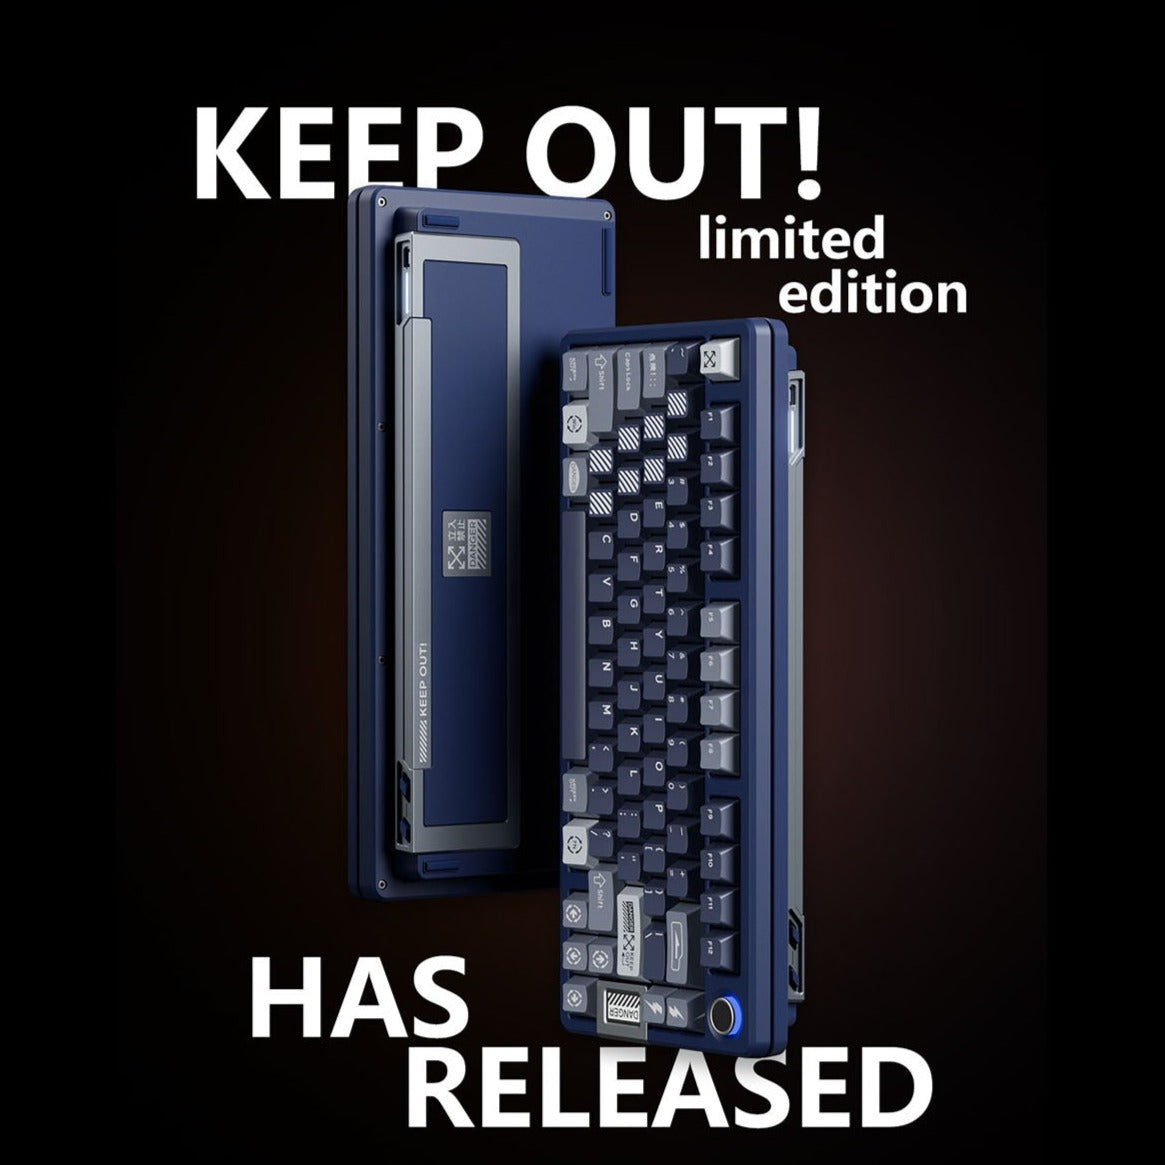 [In-Stock] Infi75 Tri-Mode Hi-Fi Rgb Mechanical Keyboard - Keep Out! Limited Edition